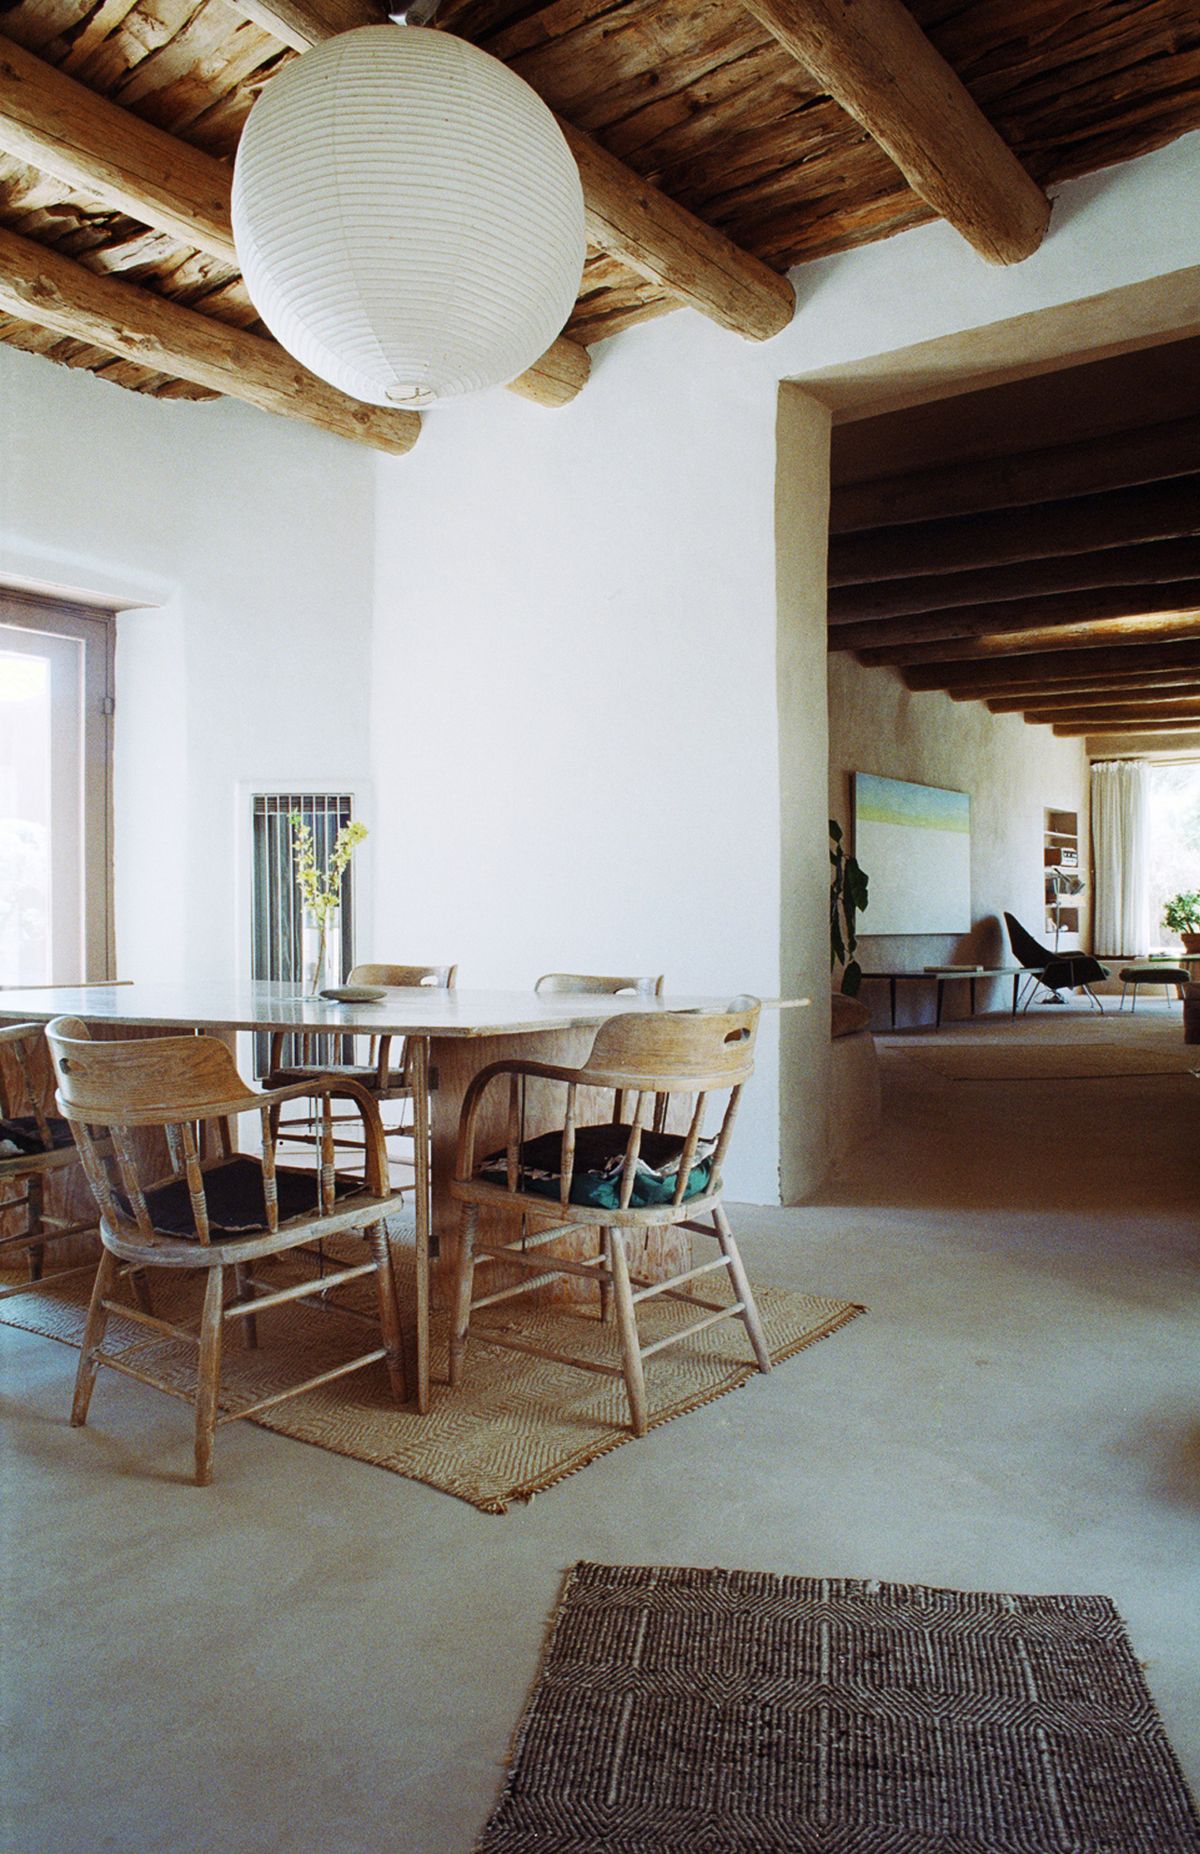 A light designed by sculptor Isamu Noguchi hangs in the dining room of the home and studio where artist Georgia O’Keeffe lived and worked in Abiquiu, N.M. (Associated Press)